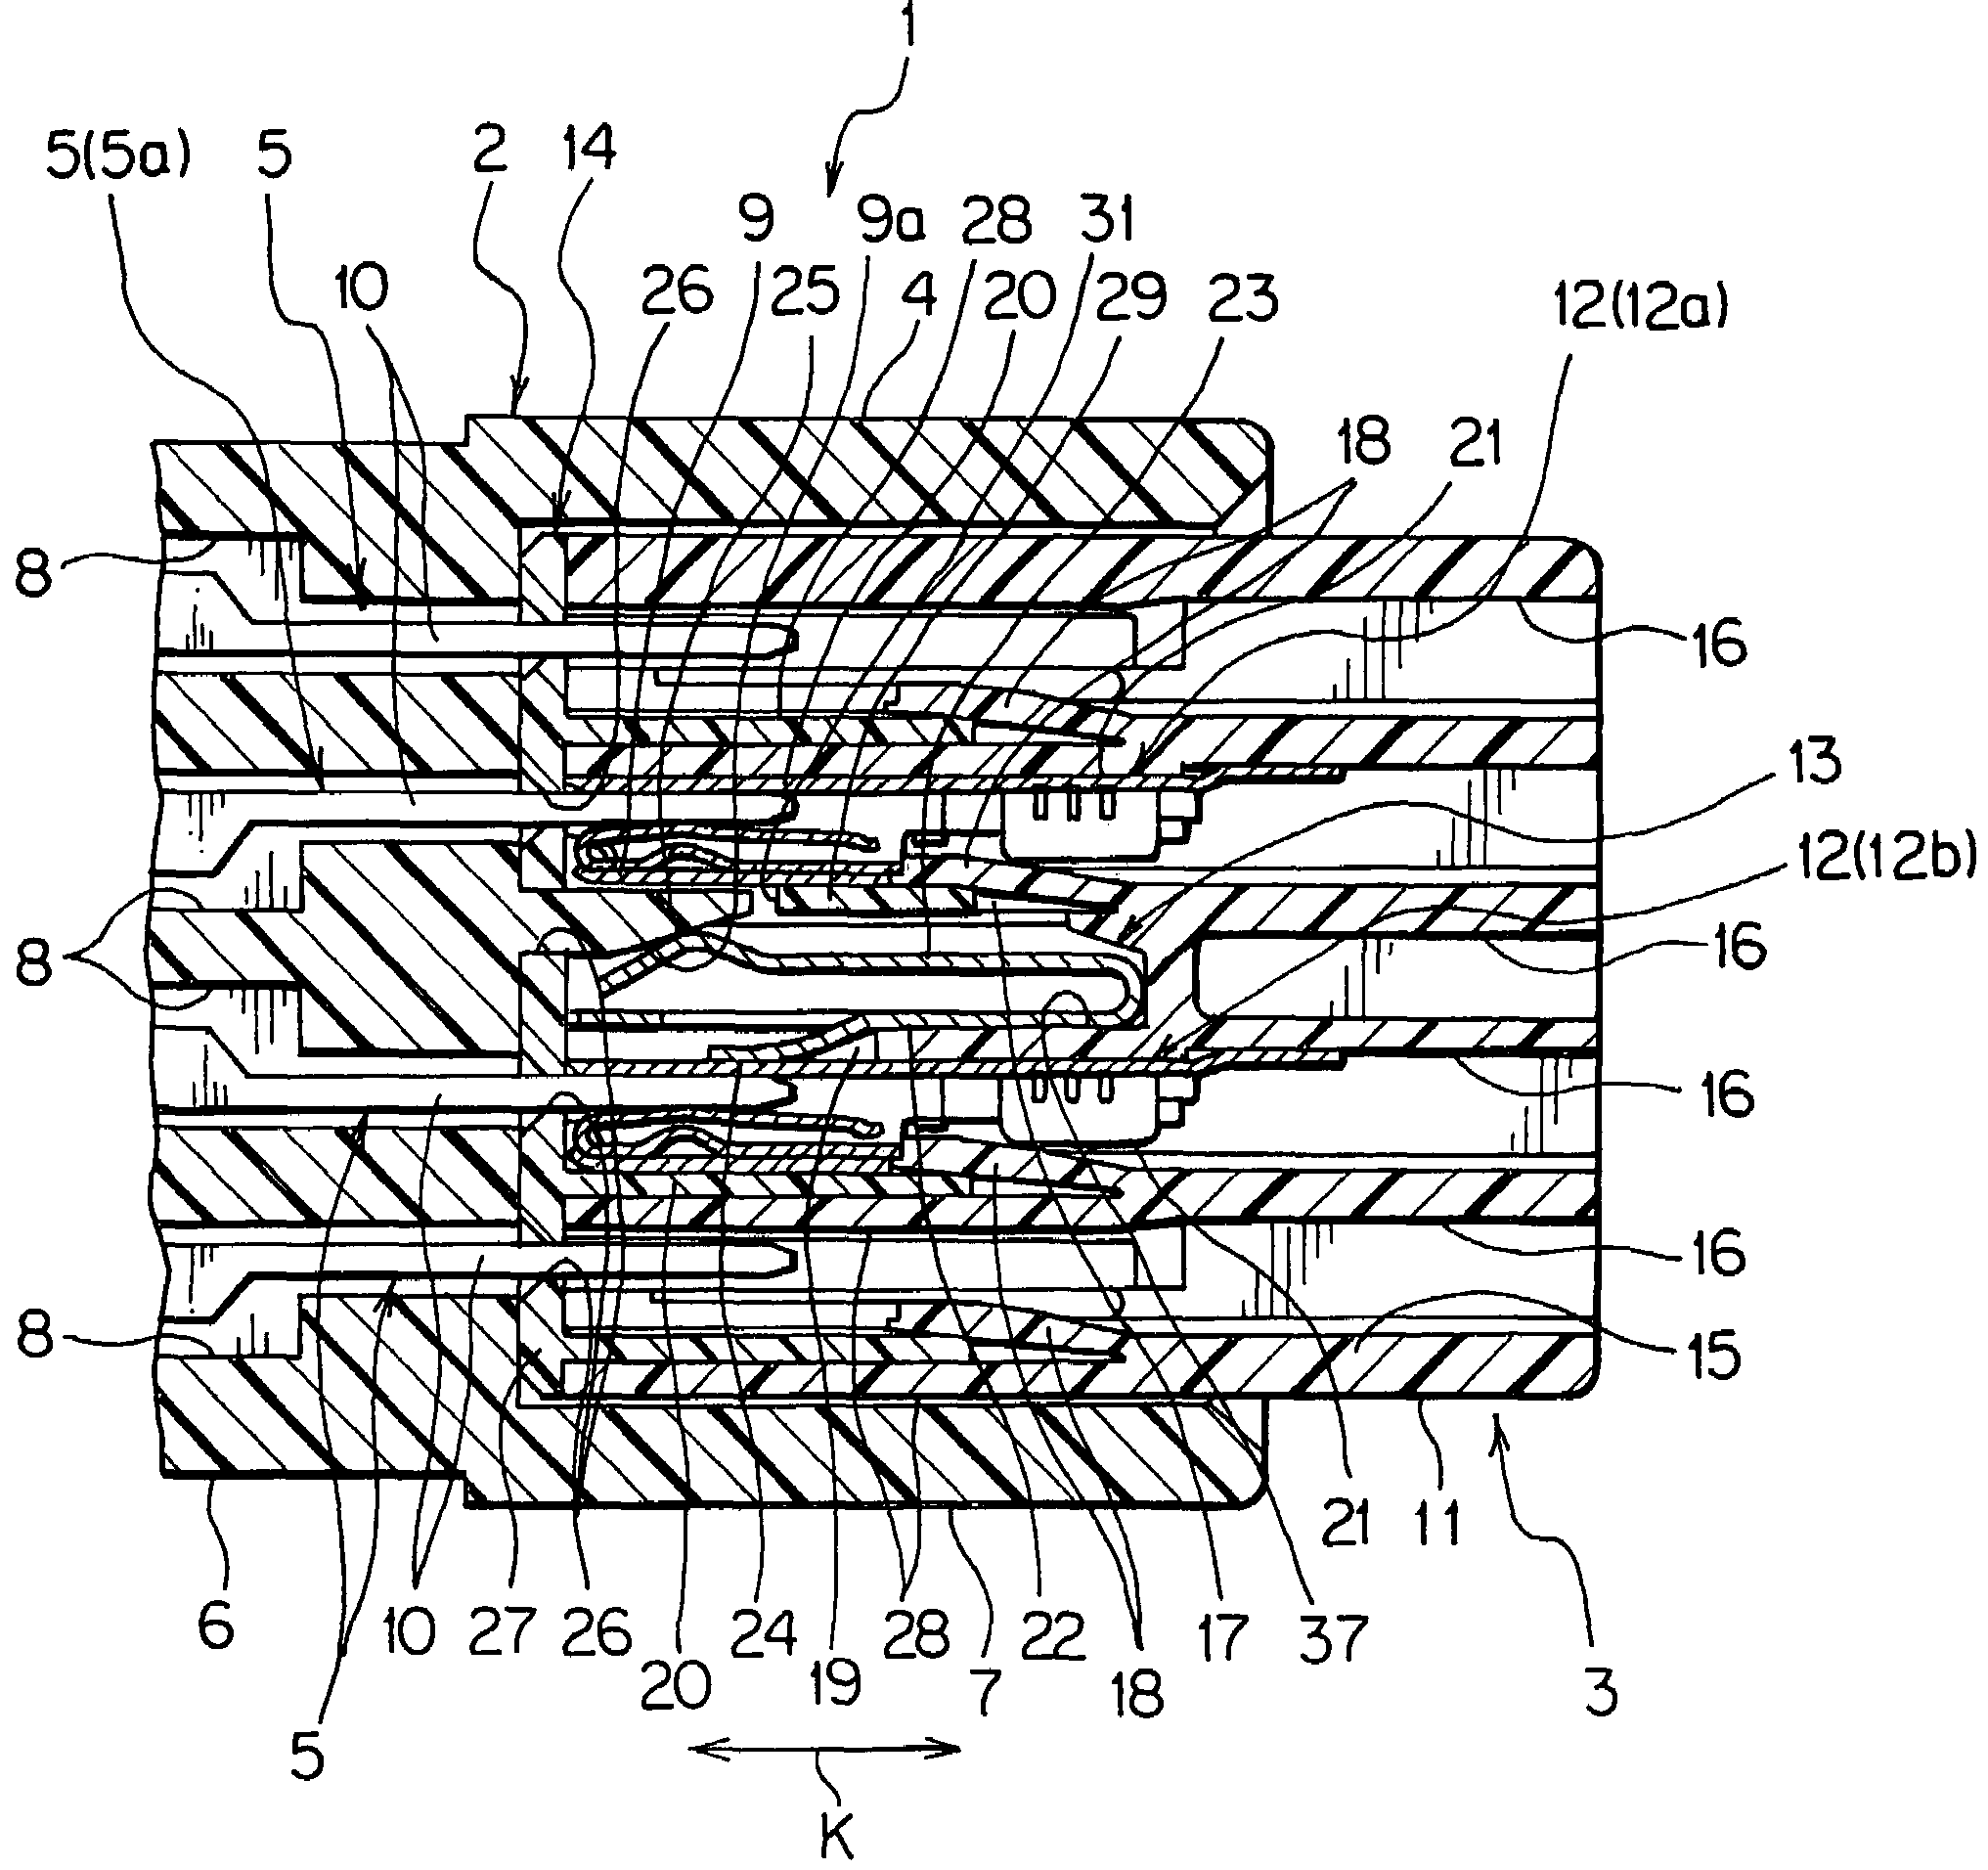 Electric connector for wiring harness having a short circuit terminal